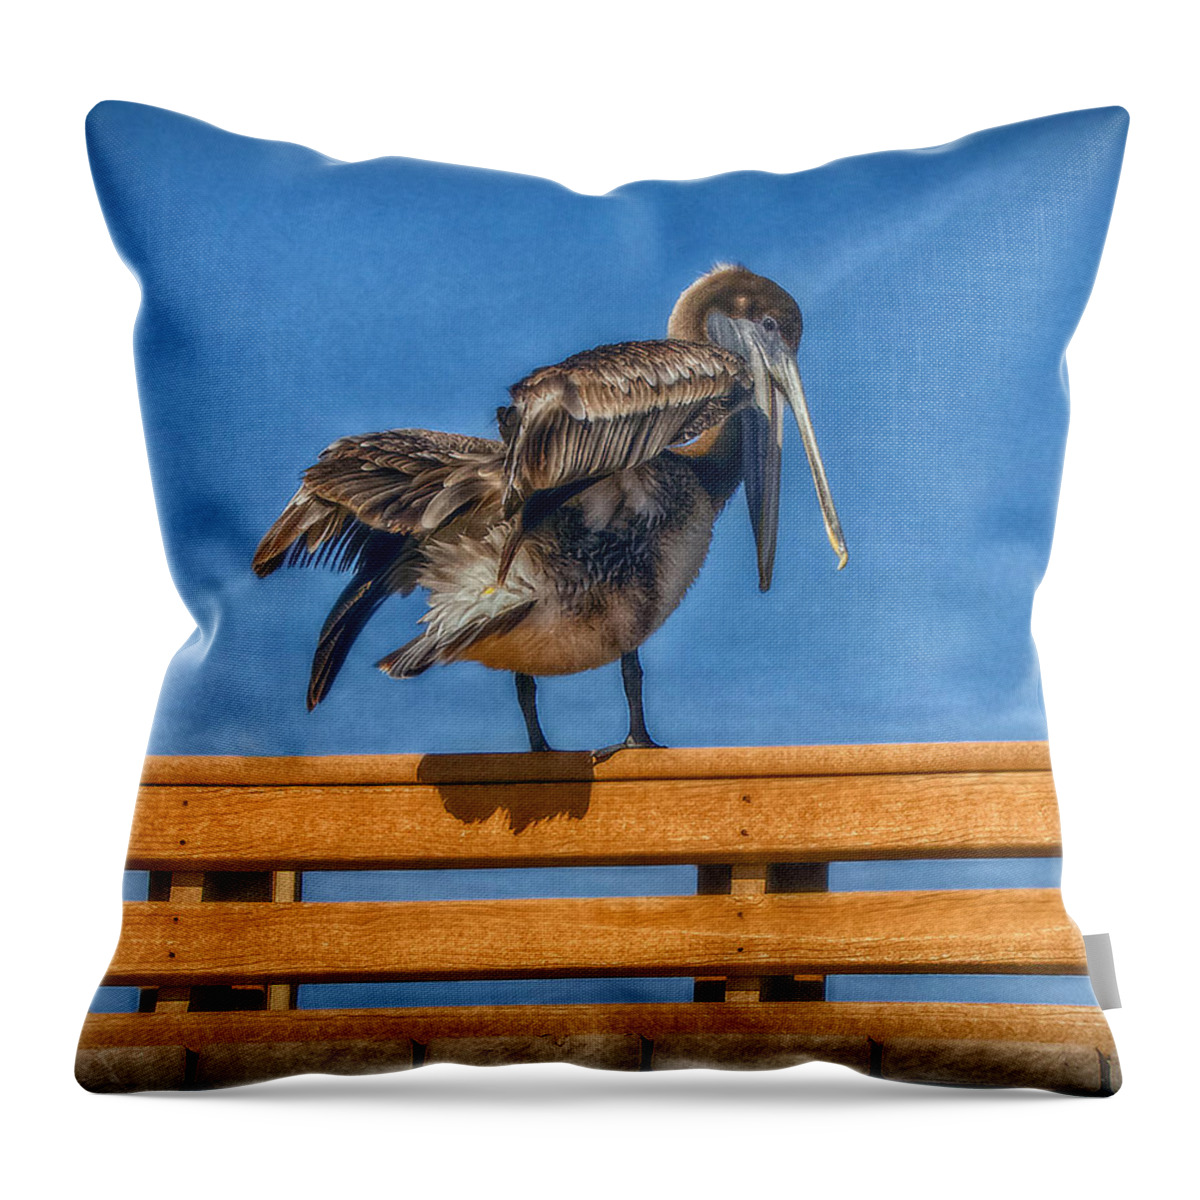 Pelican Throw Pillow featuring the photograph The Pelican by Hanny Heim